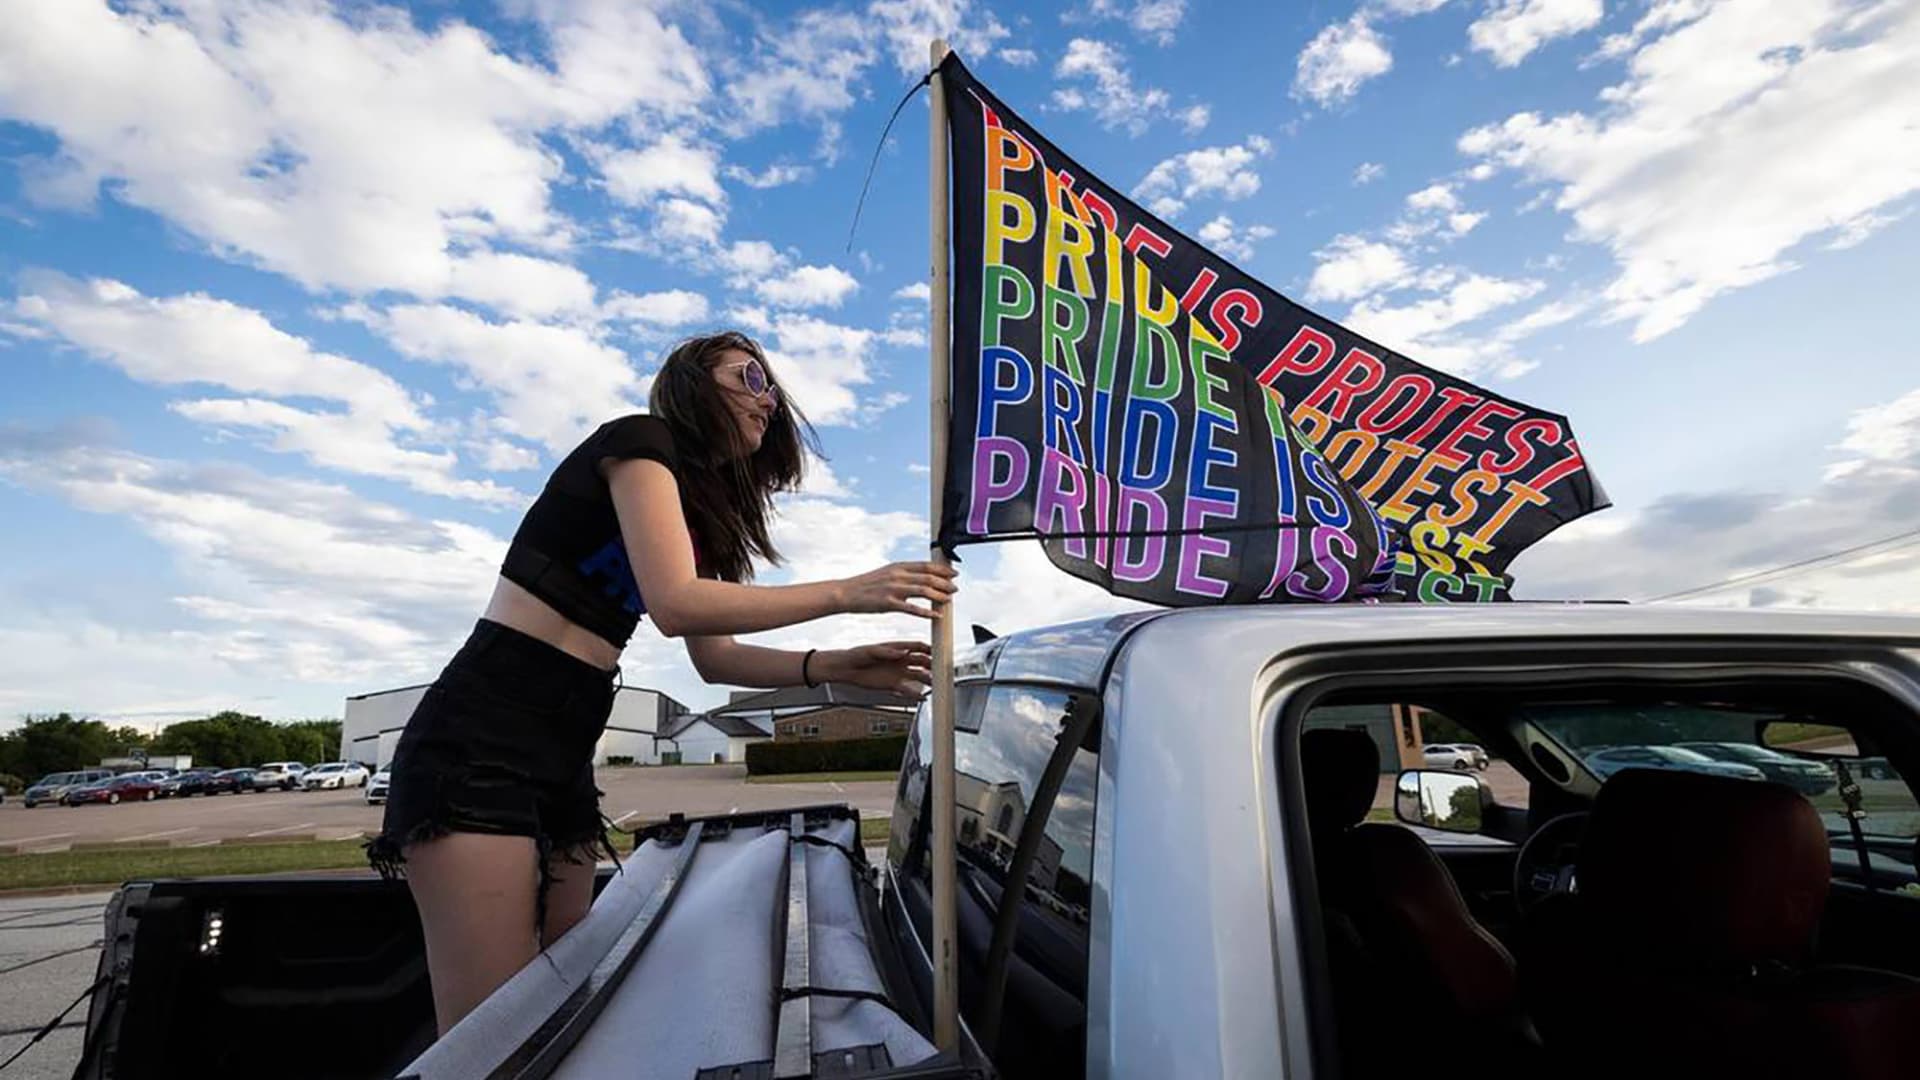 Hillary Ward puts up a Pride flag while protesting near Stedfast Baptist Church where a pastor preaches against homosexuality, on June 1, 2022, in Watauga, Texas.